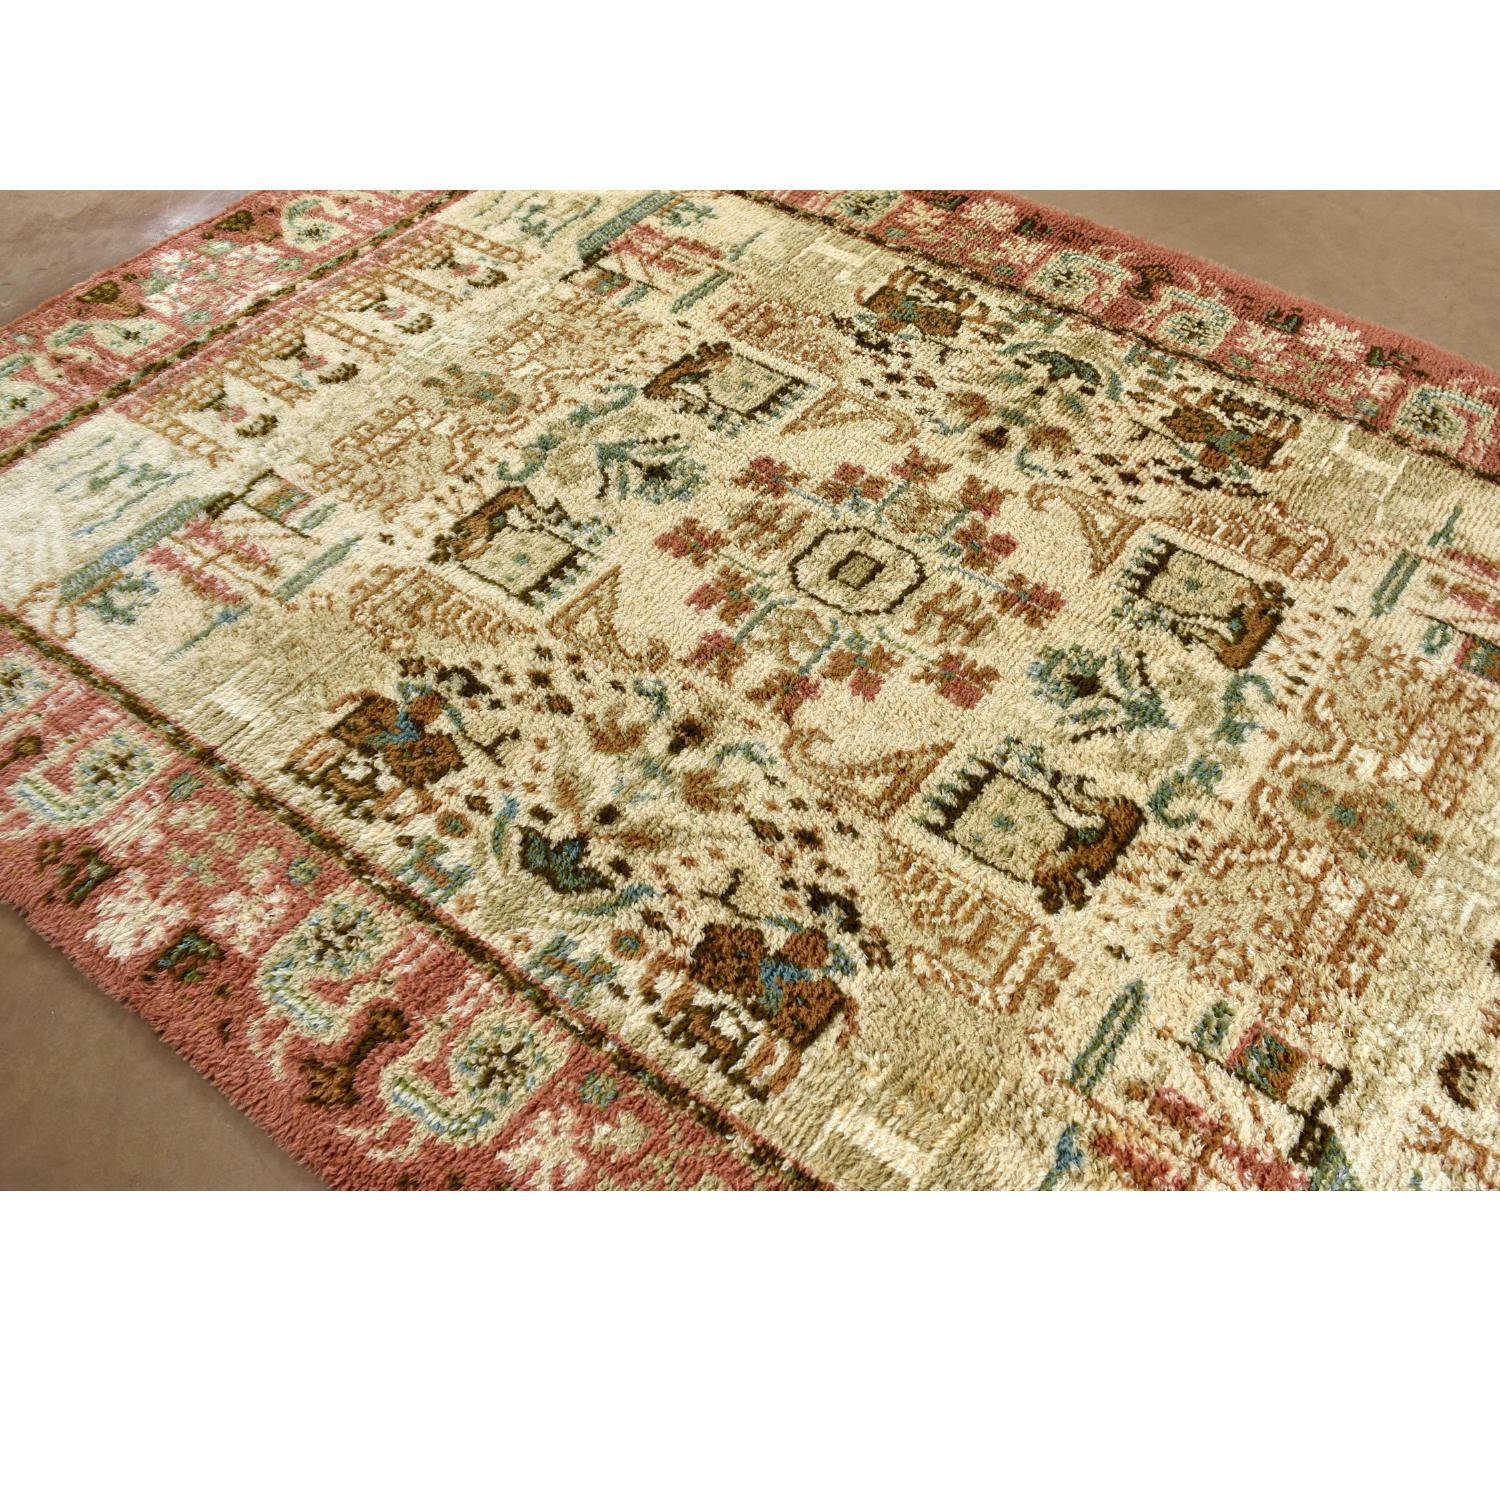 Late 20th Century Vintage Fjord Life Danish Wool 6x9 Area Rug by Ege Axminster